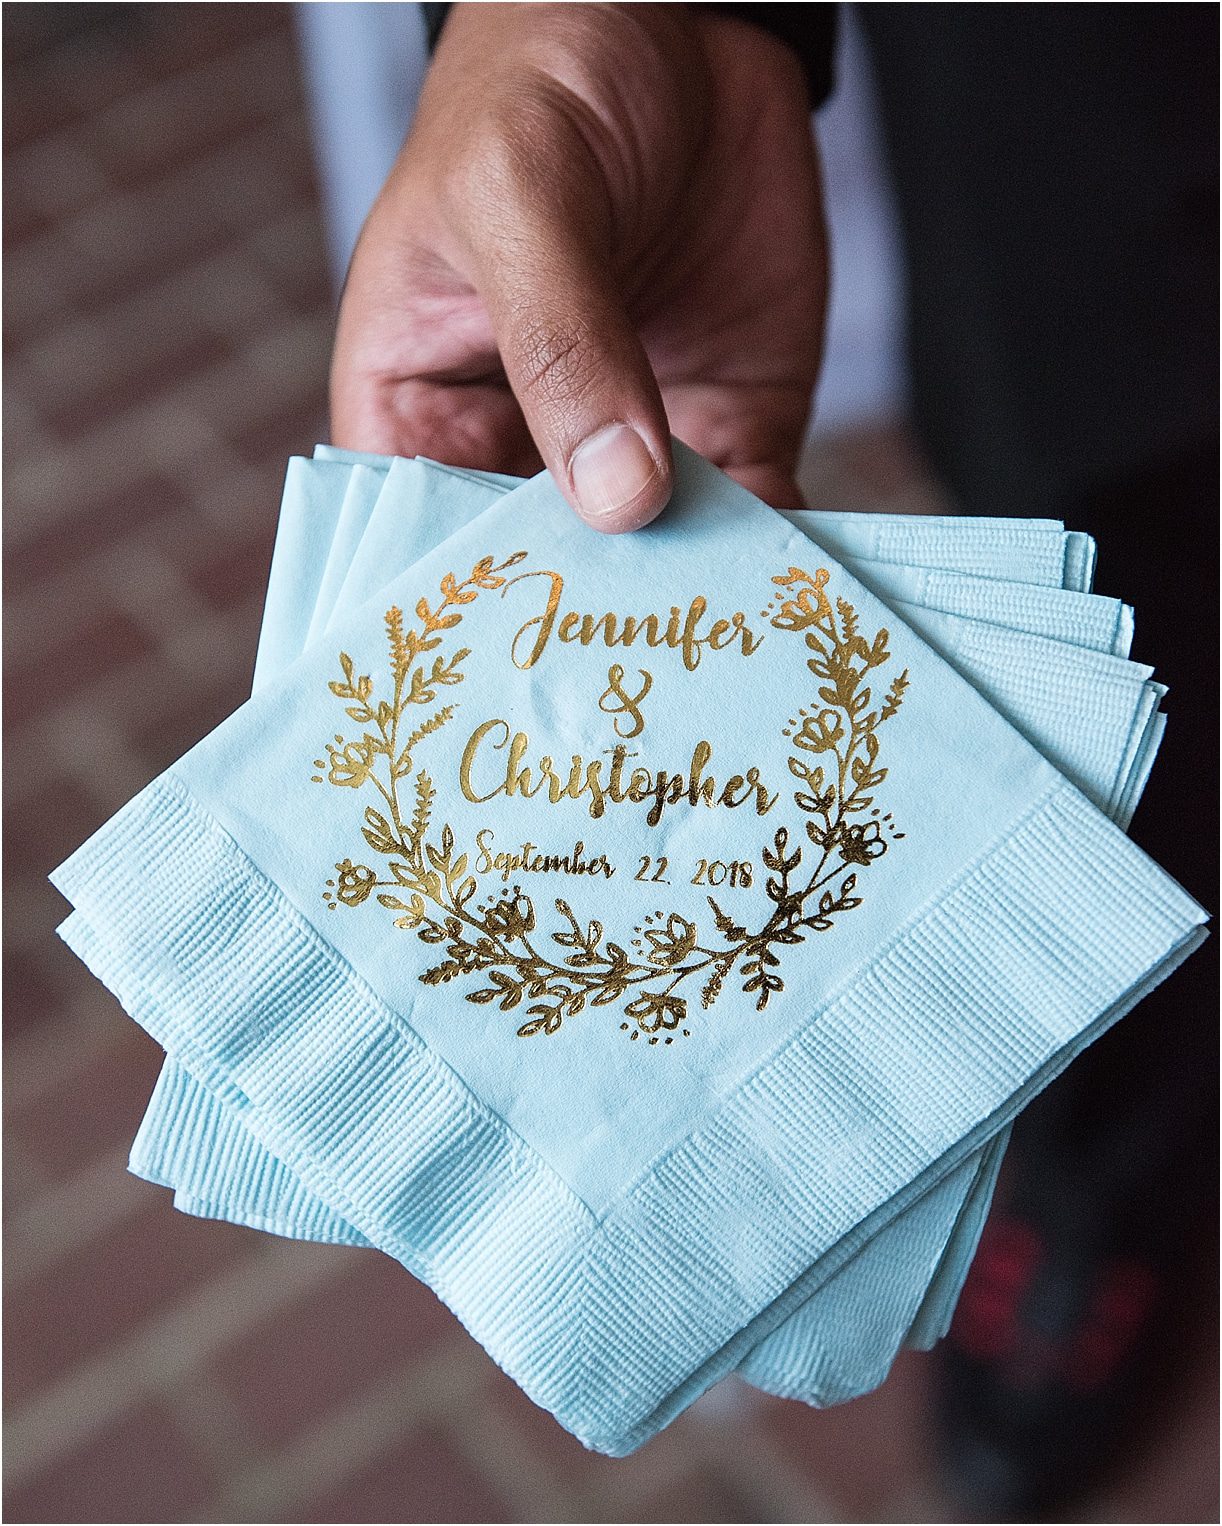 Blue Outdoor Wedding in Alexandria Virginia with Perfect Details | Hill City Bride Blog for Ideas and Inspiration Alexandria Napkins Personalized